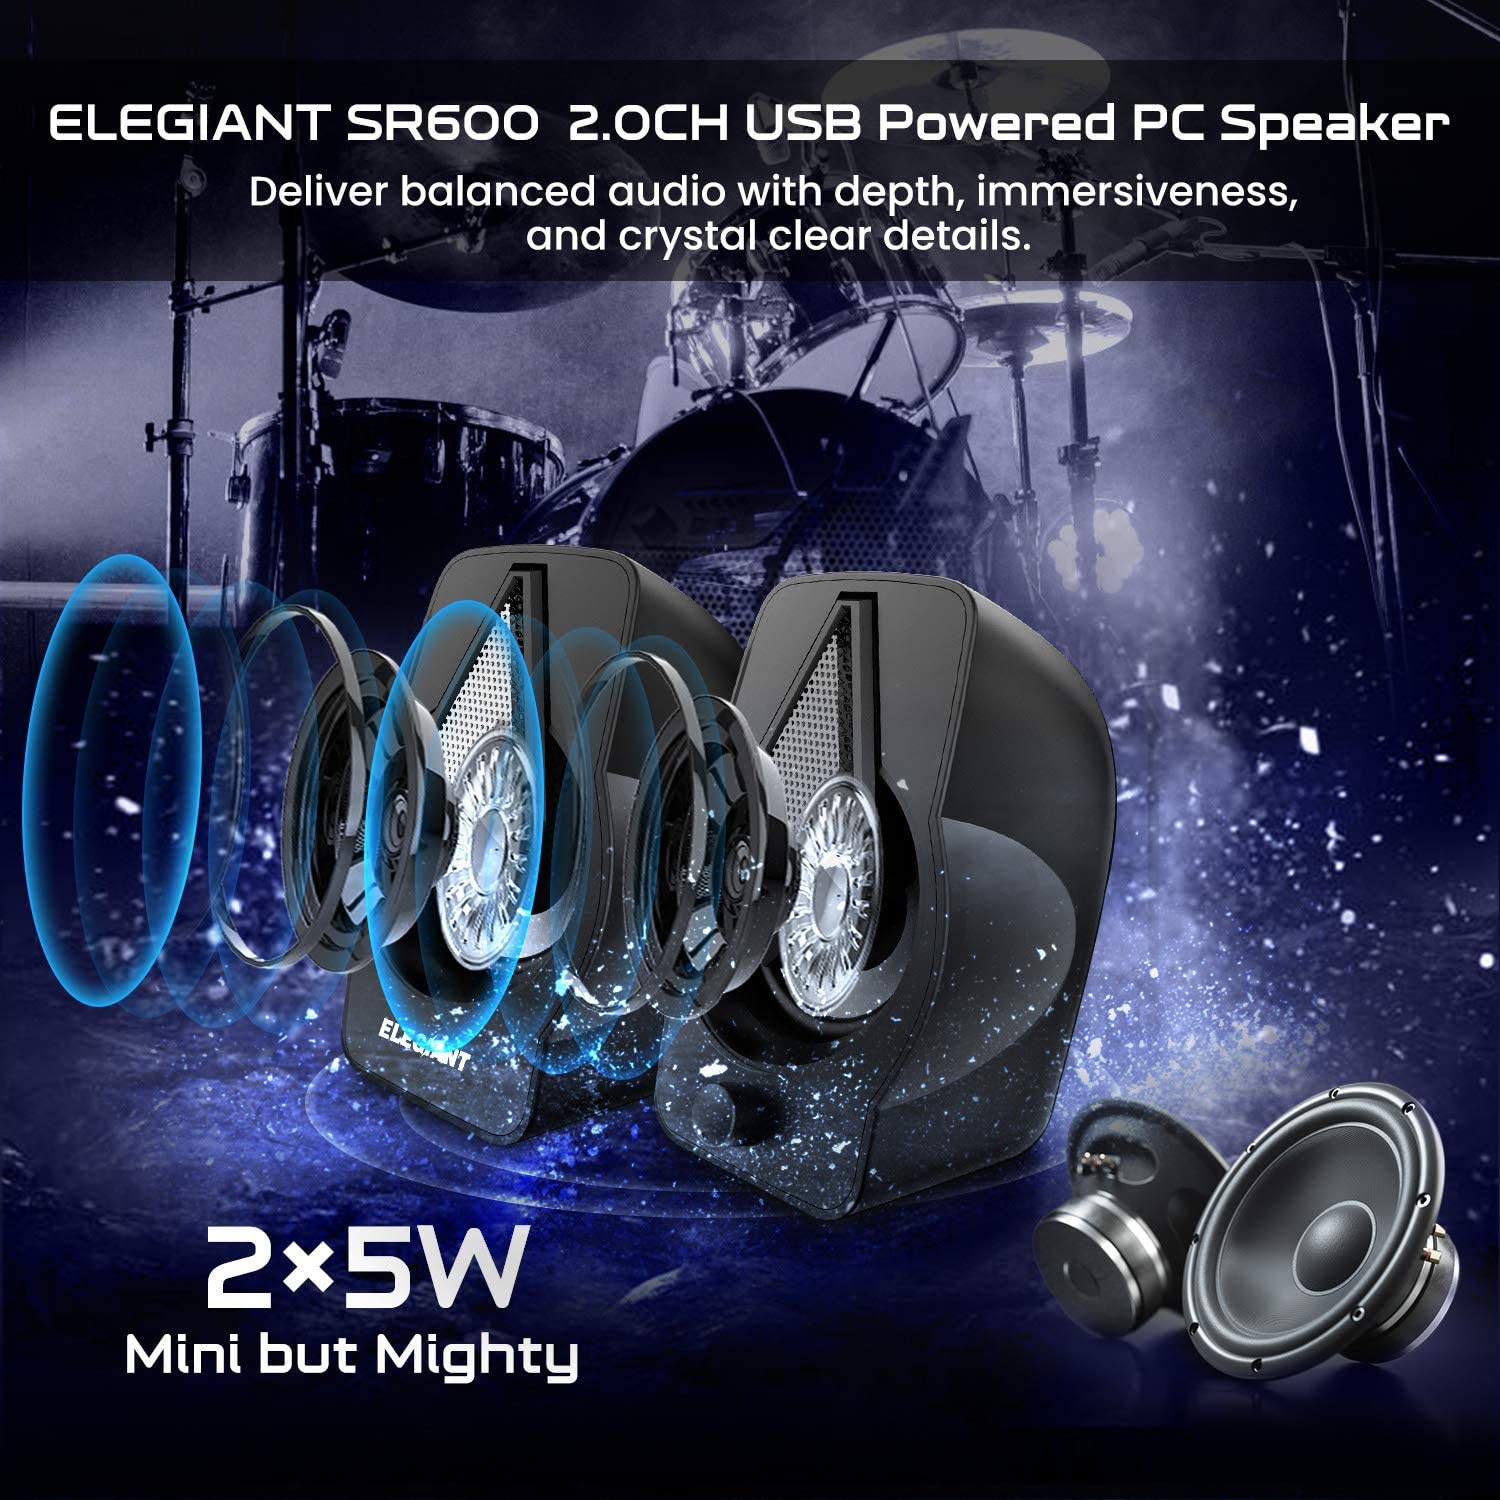 Computer Gaming Speakers, ELEGIANT 10W LED PC Speakers with RGB Multi-Light Rhythm Modes, Easy-Access Volume Control, 2.0 Stereo USB Speakers for PC/Laptops/Desktops/Phone/Ipad - image 2 of 7